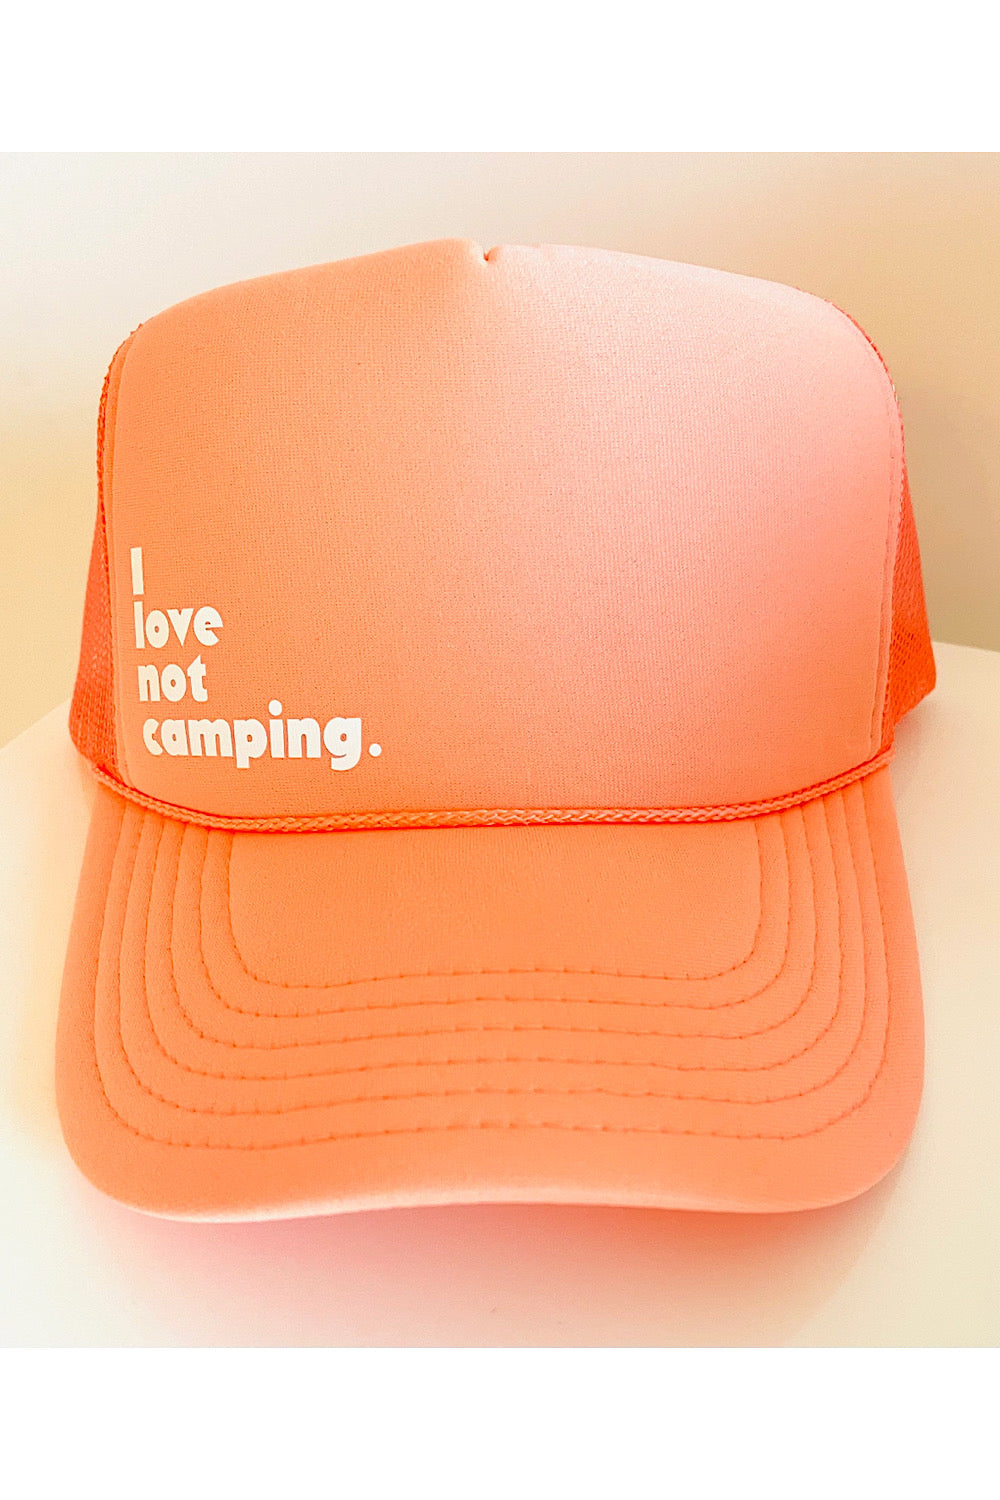 I LOVE NOT CAMPING CORAL TRUCKER HAT